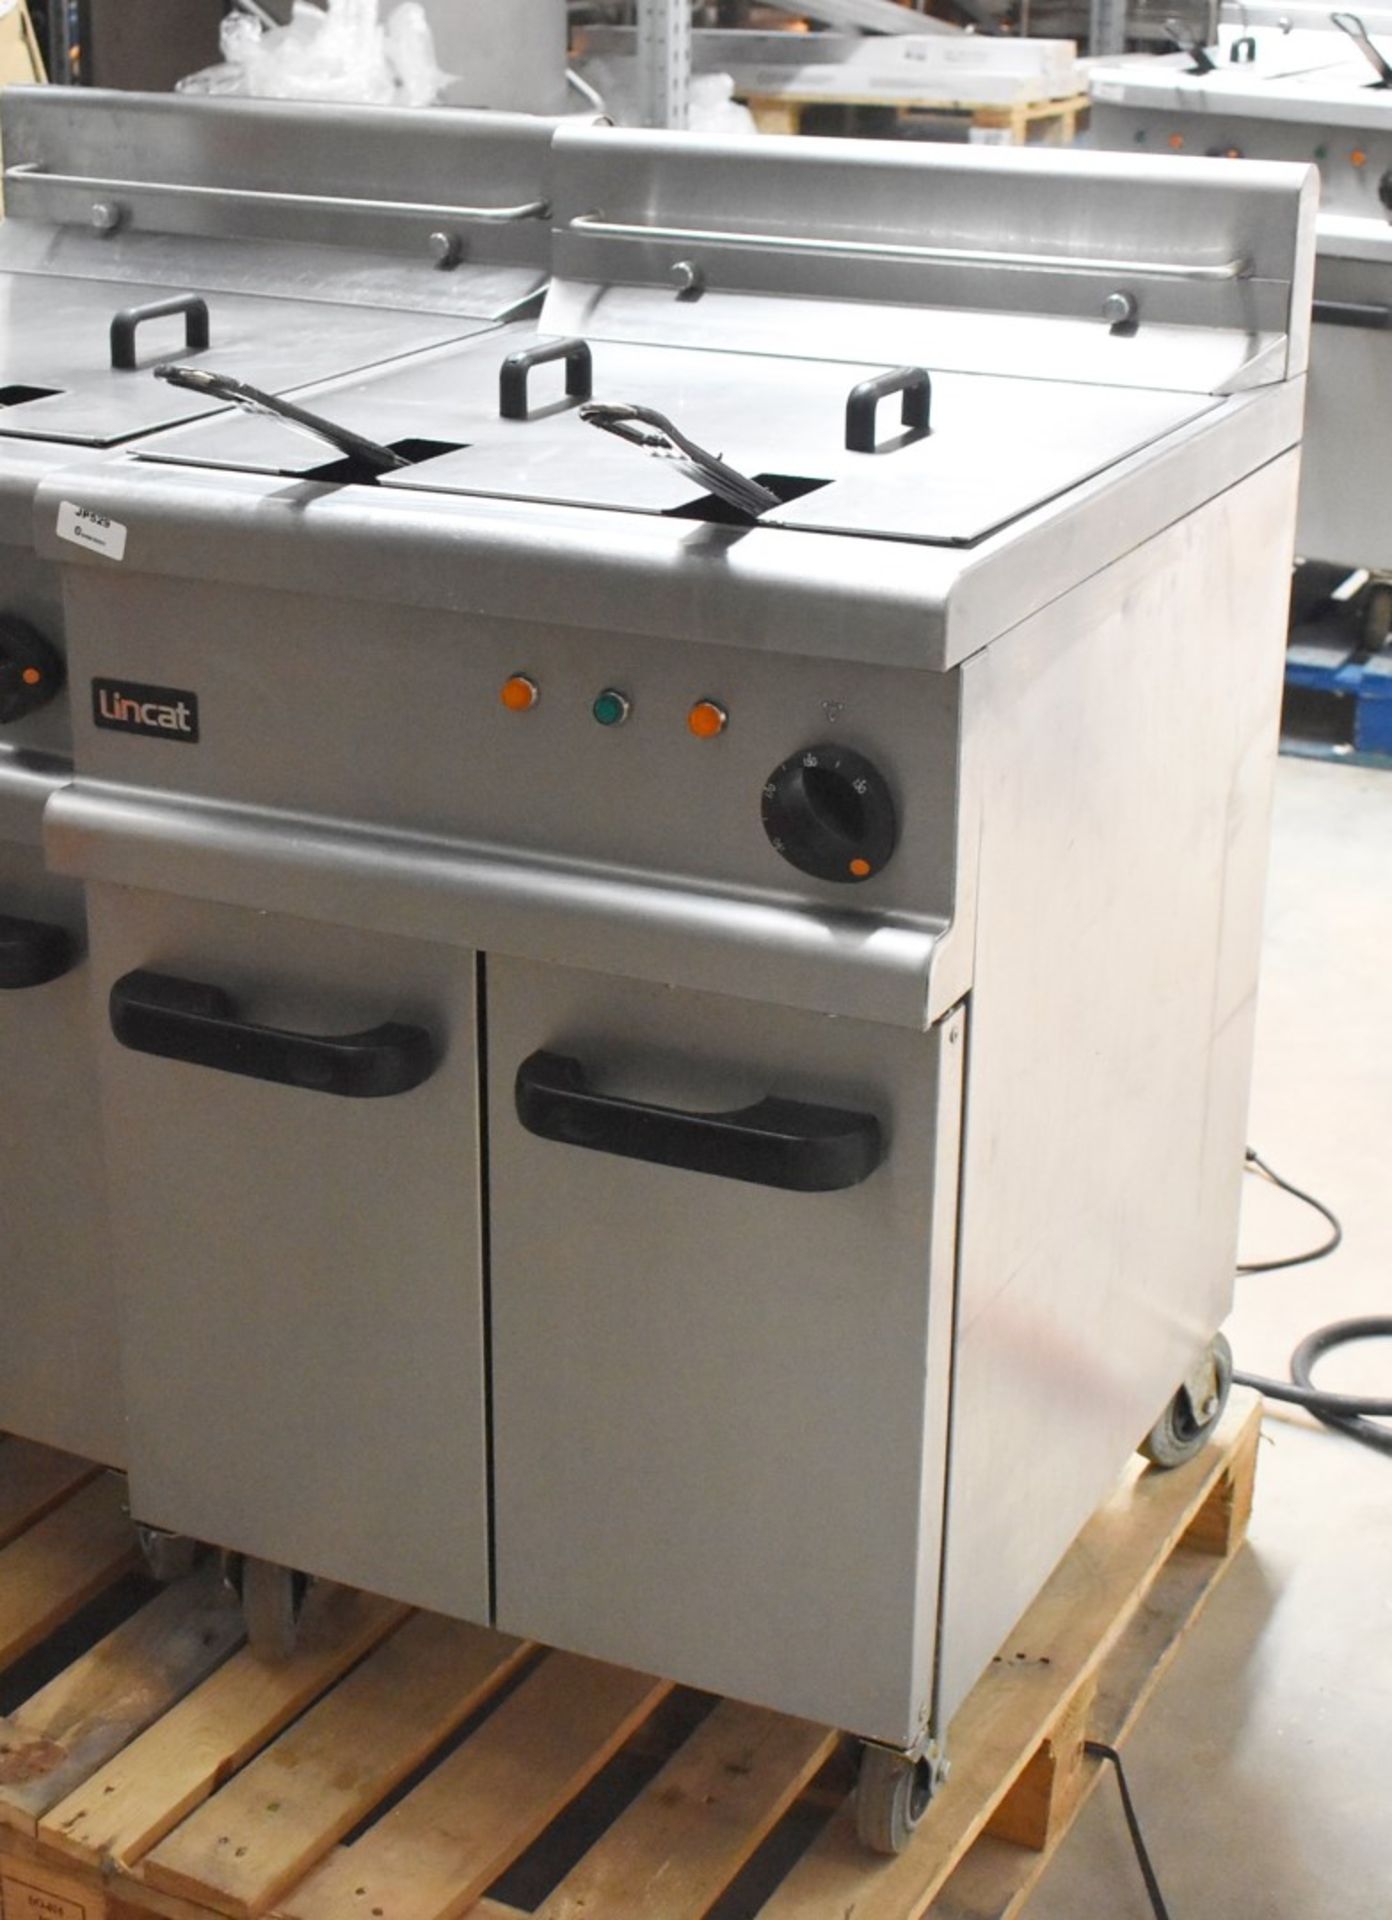 1 x Lincat Opus 700 OE7113 Single Large Tank Electric Fryer With Built In Filteration - 240V / 3PH P